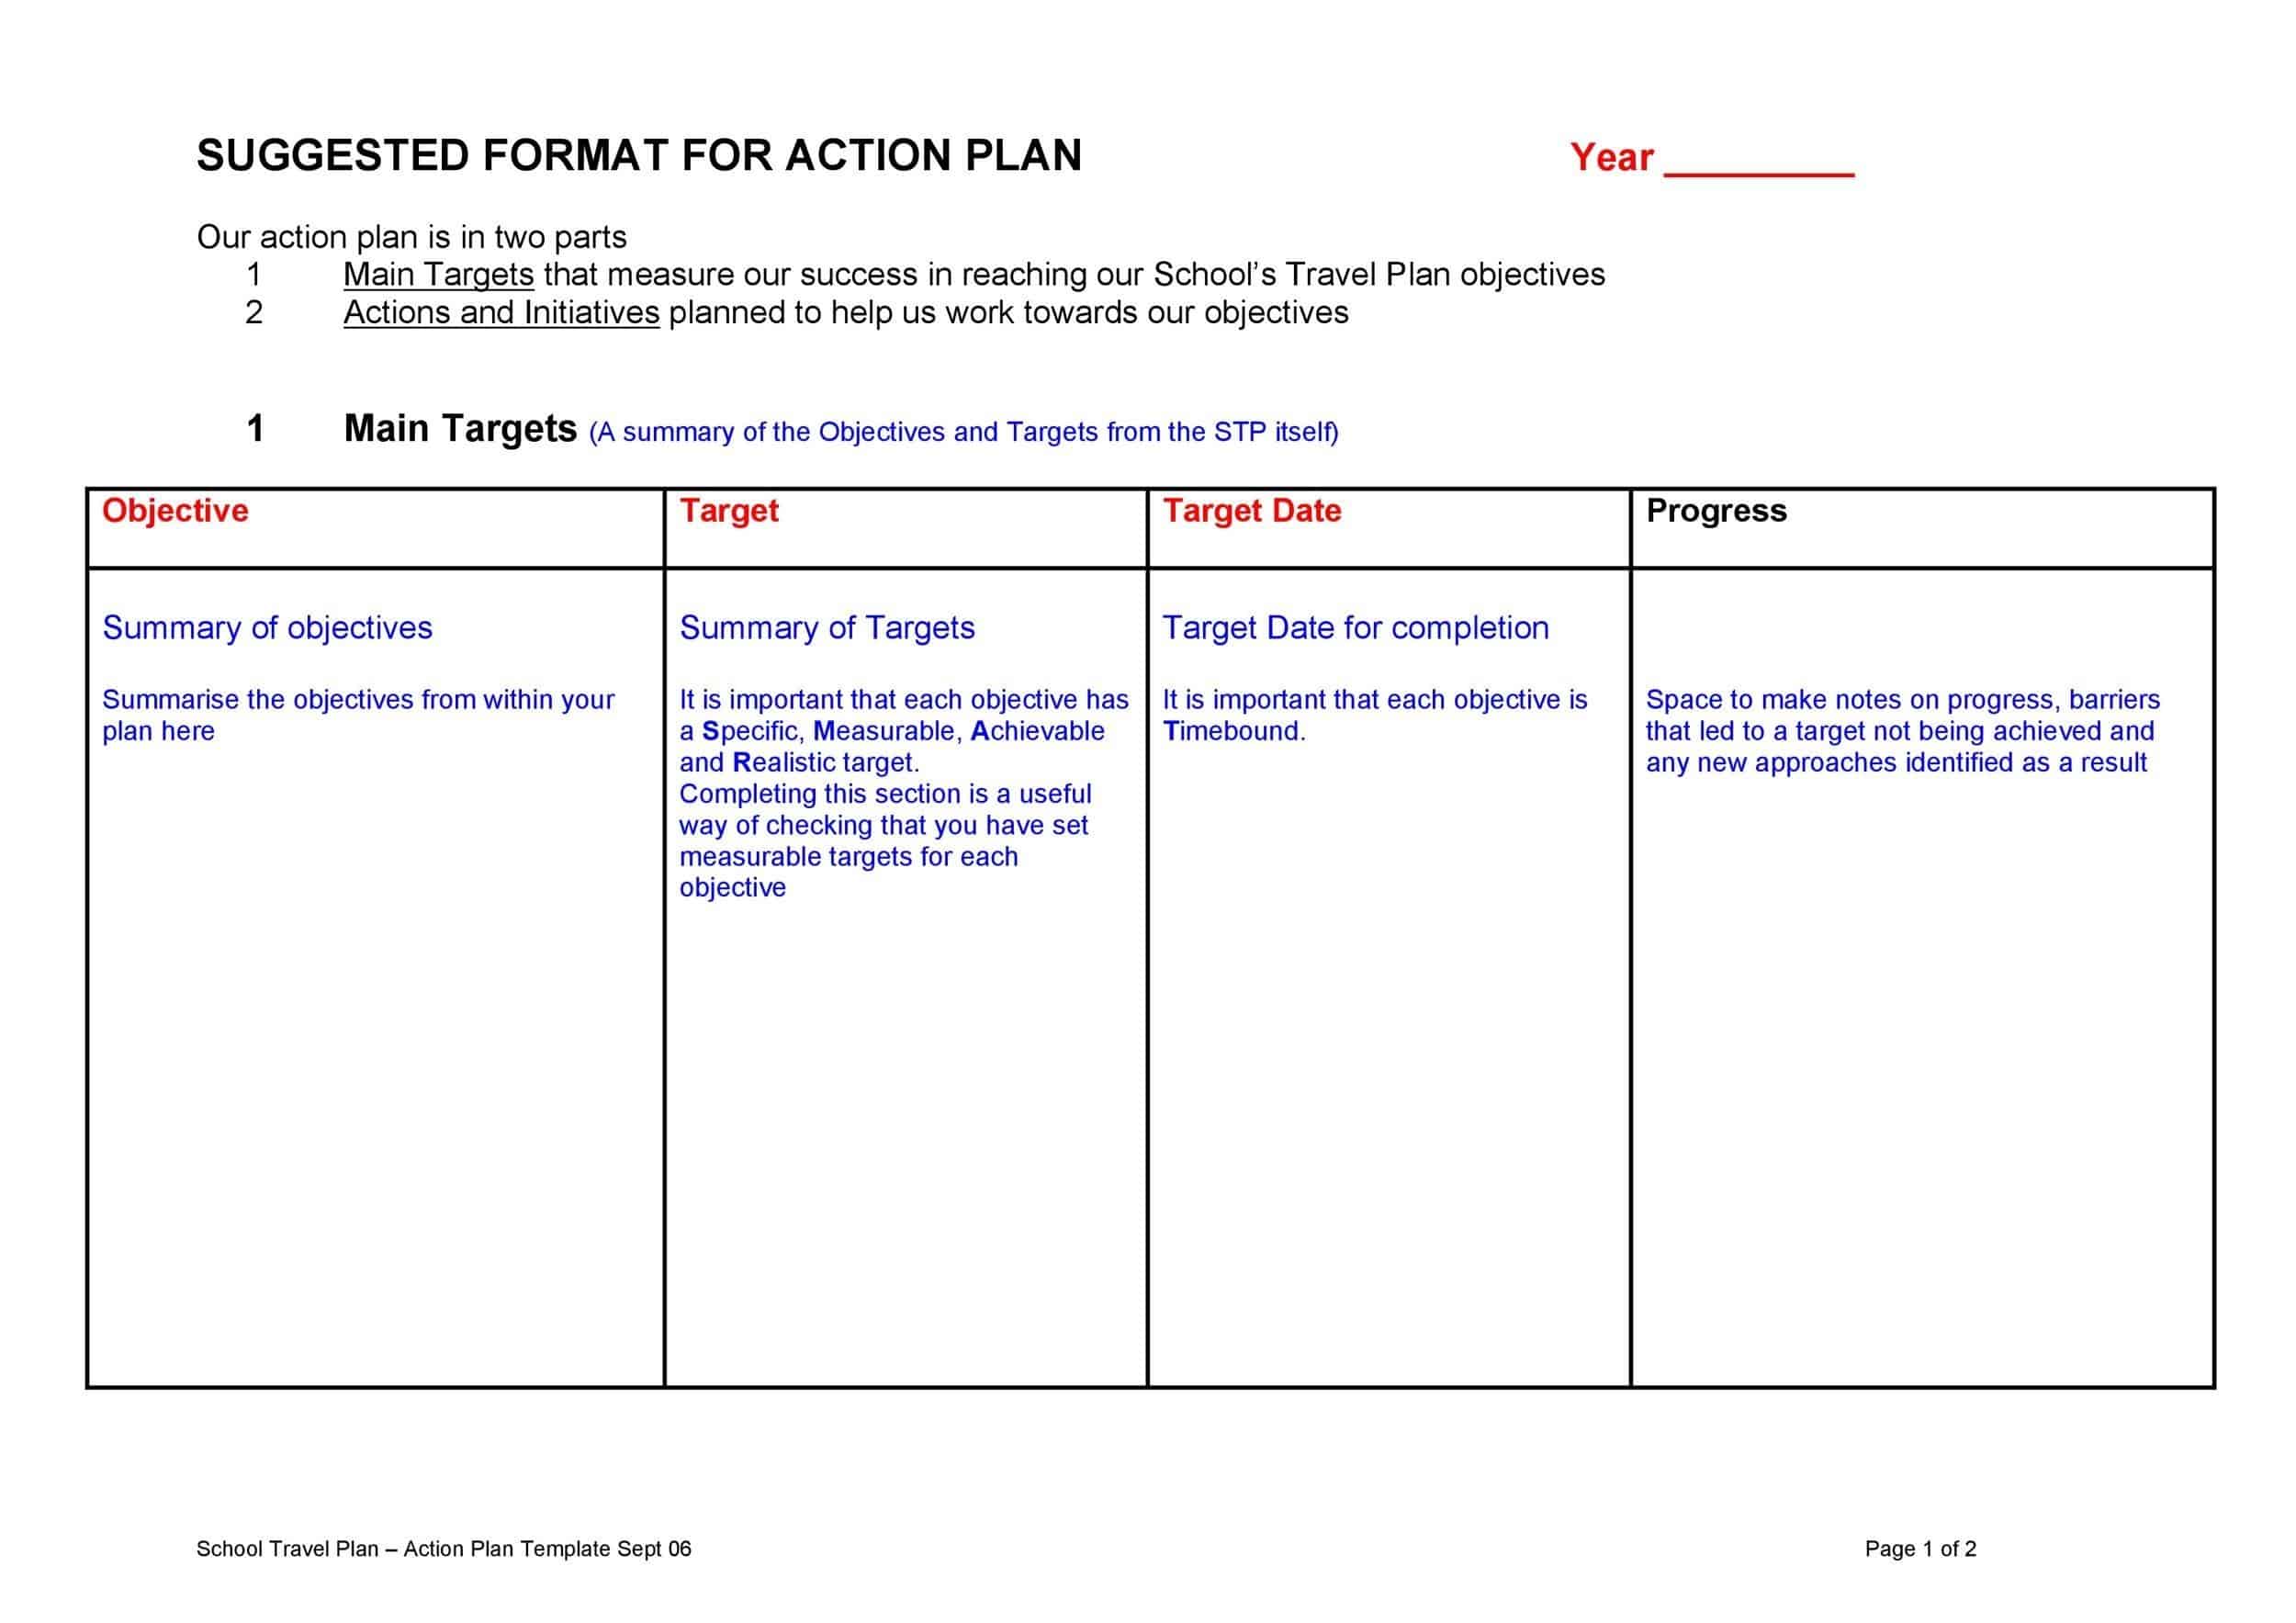 sample business plan of action